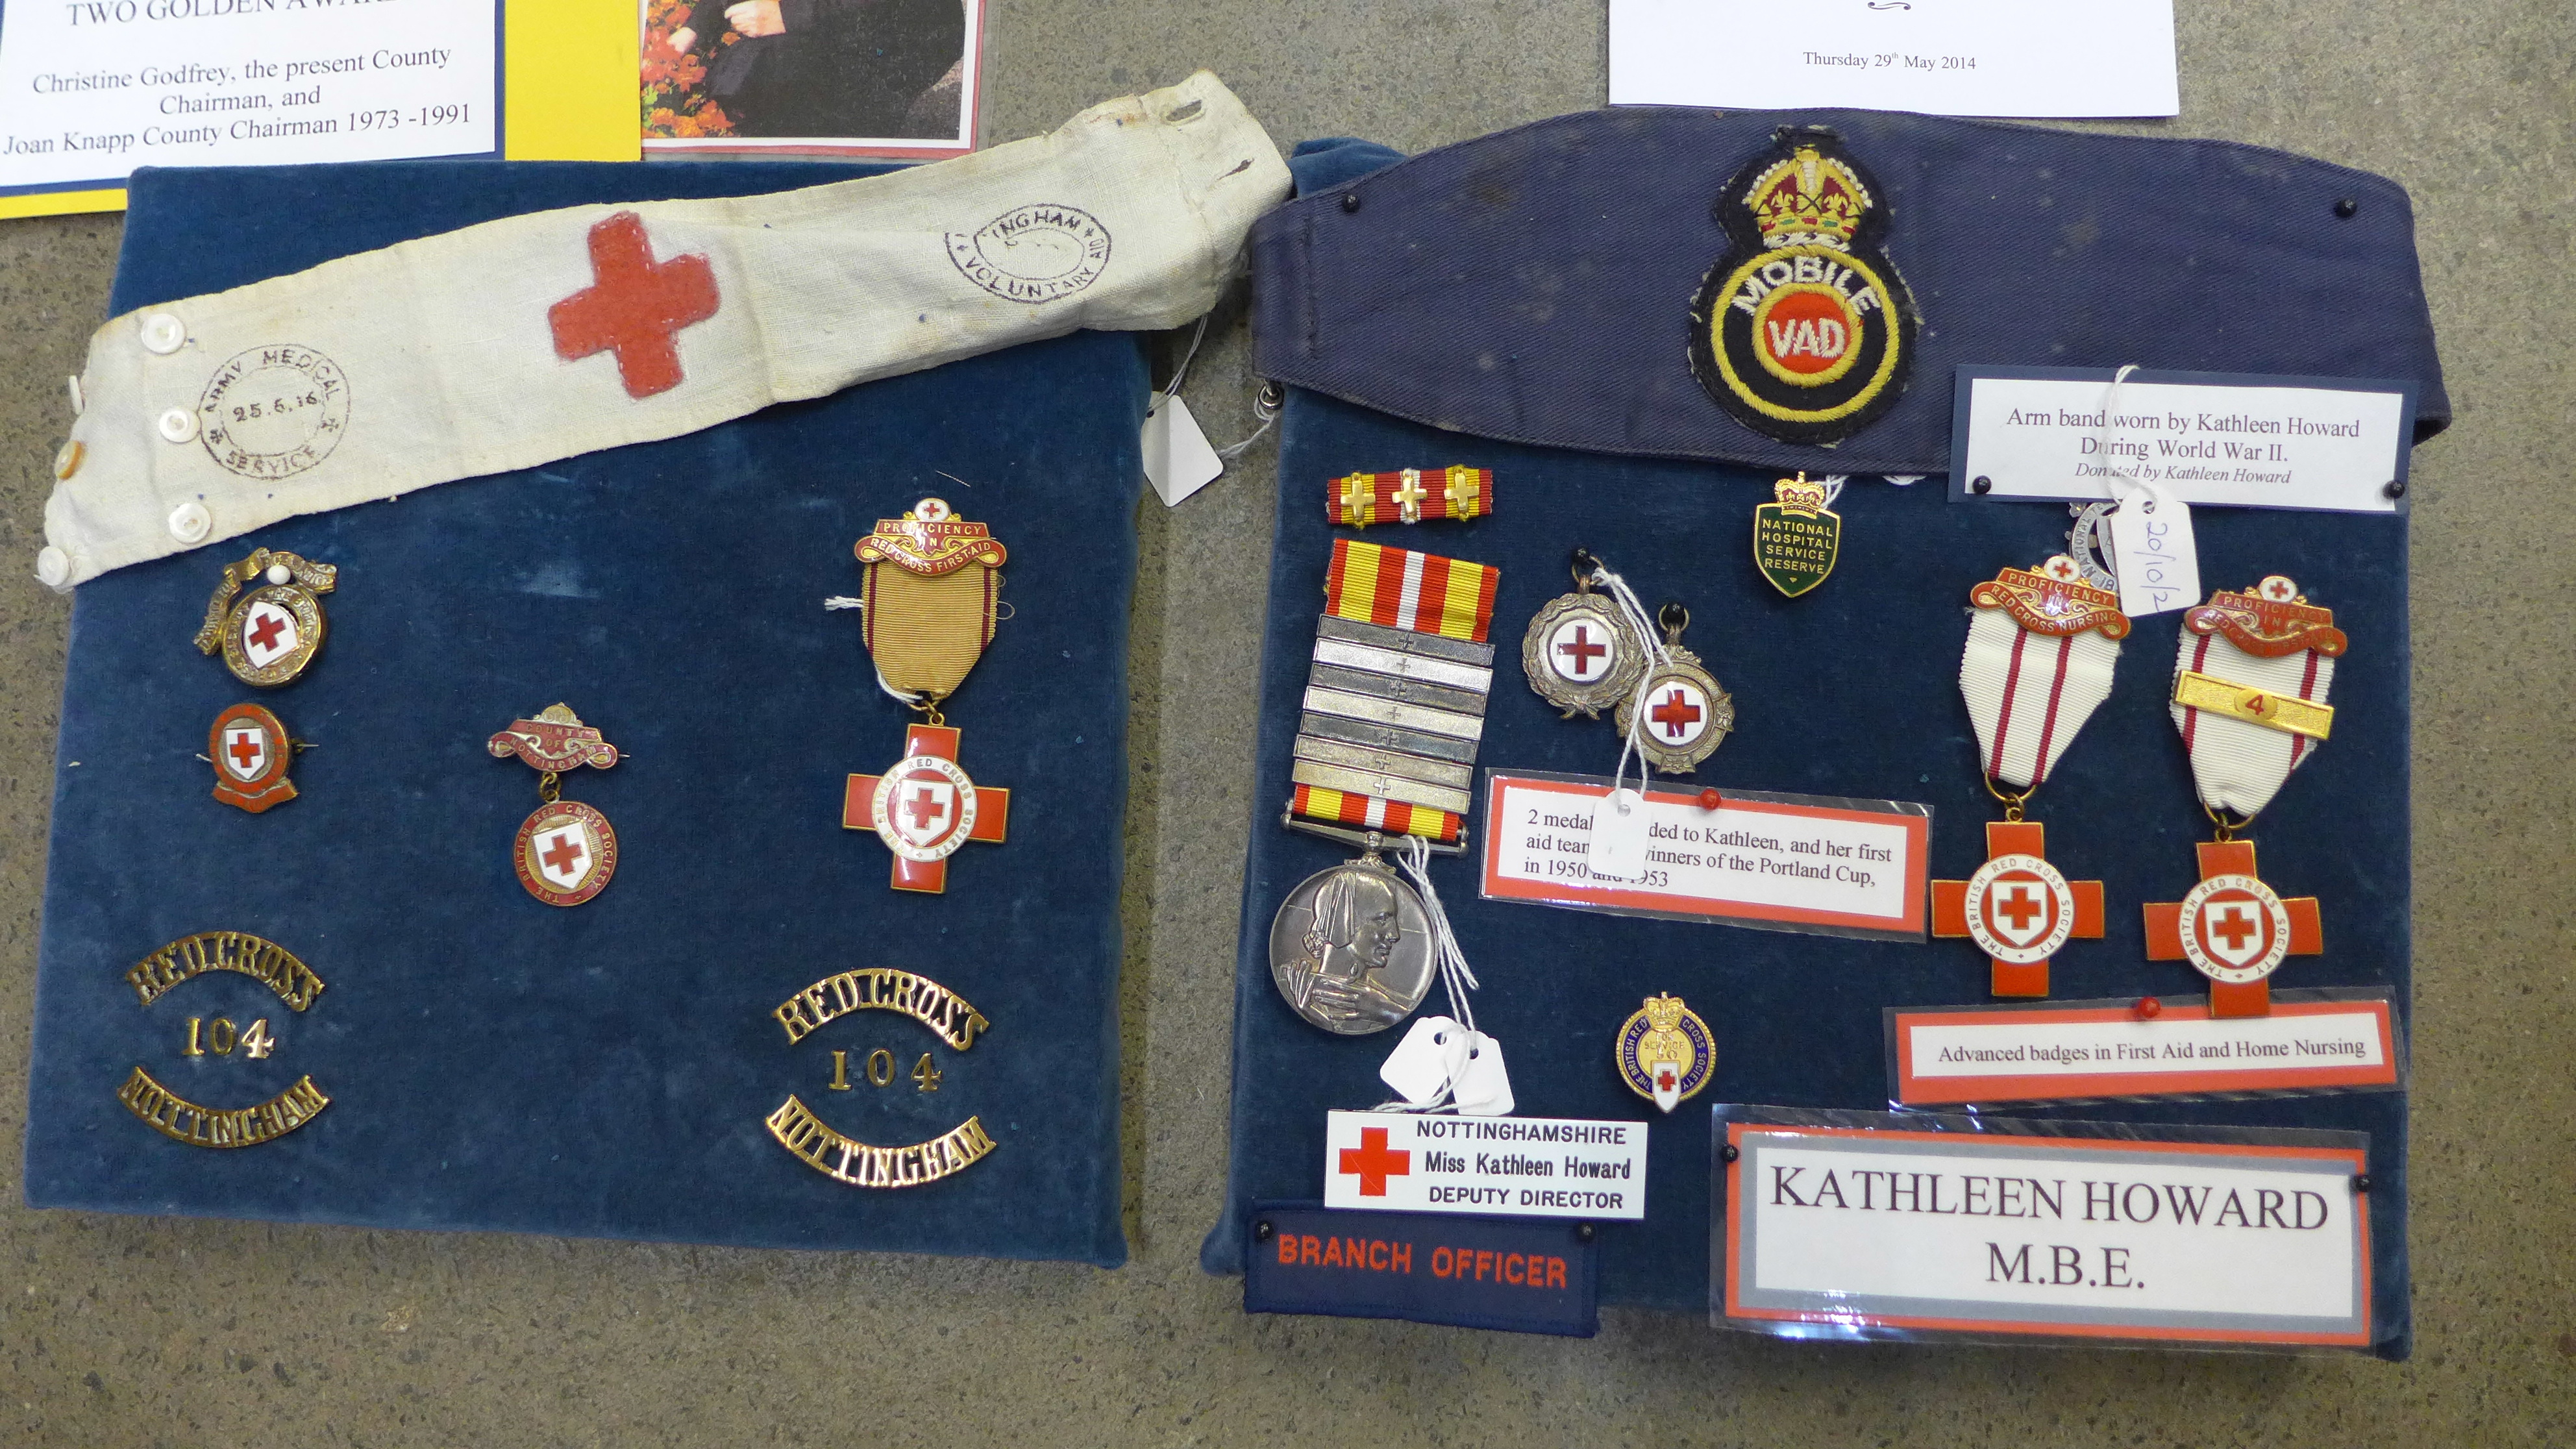 Kathleen Howard, M.B.E., a collection of medals, medallions and awards including M.B.E., Red Cross - Image 2 of 4